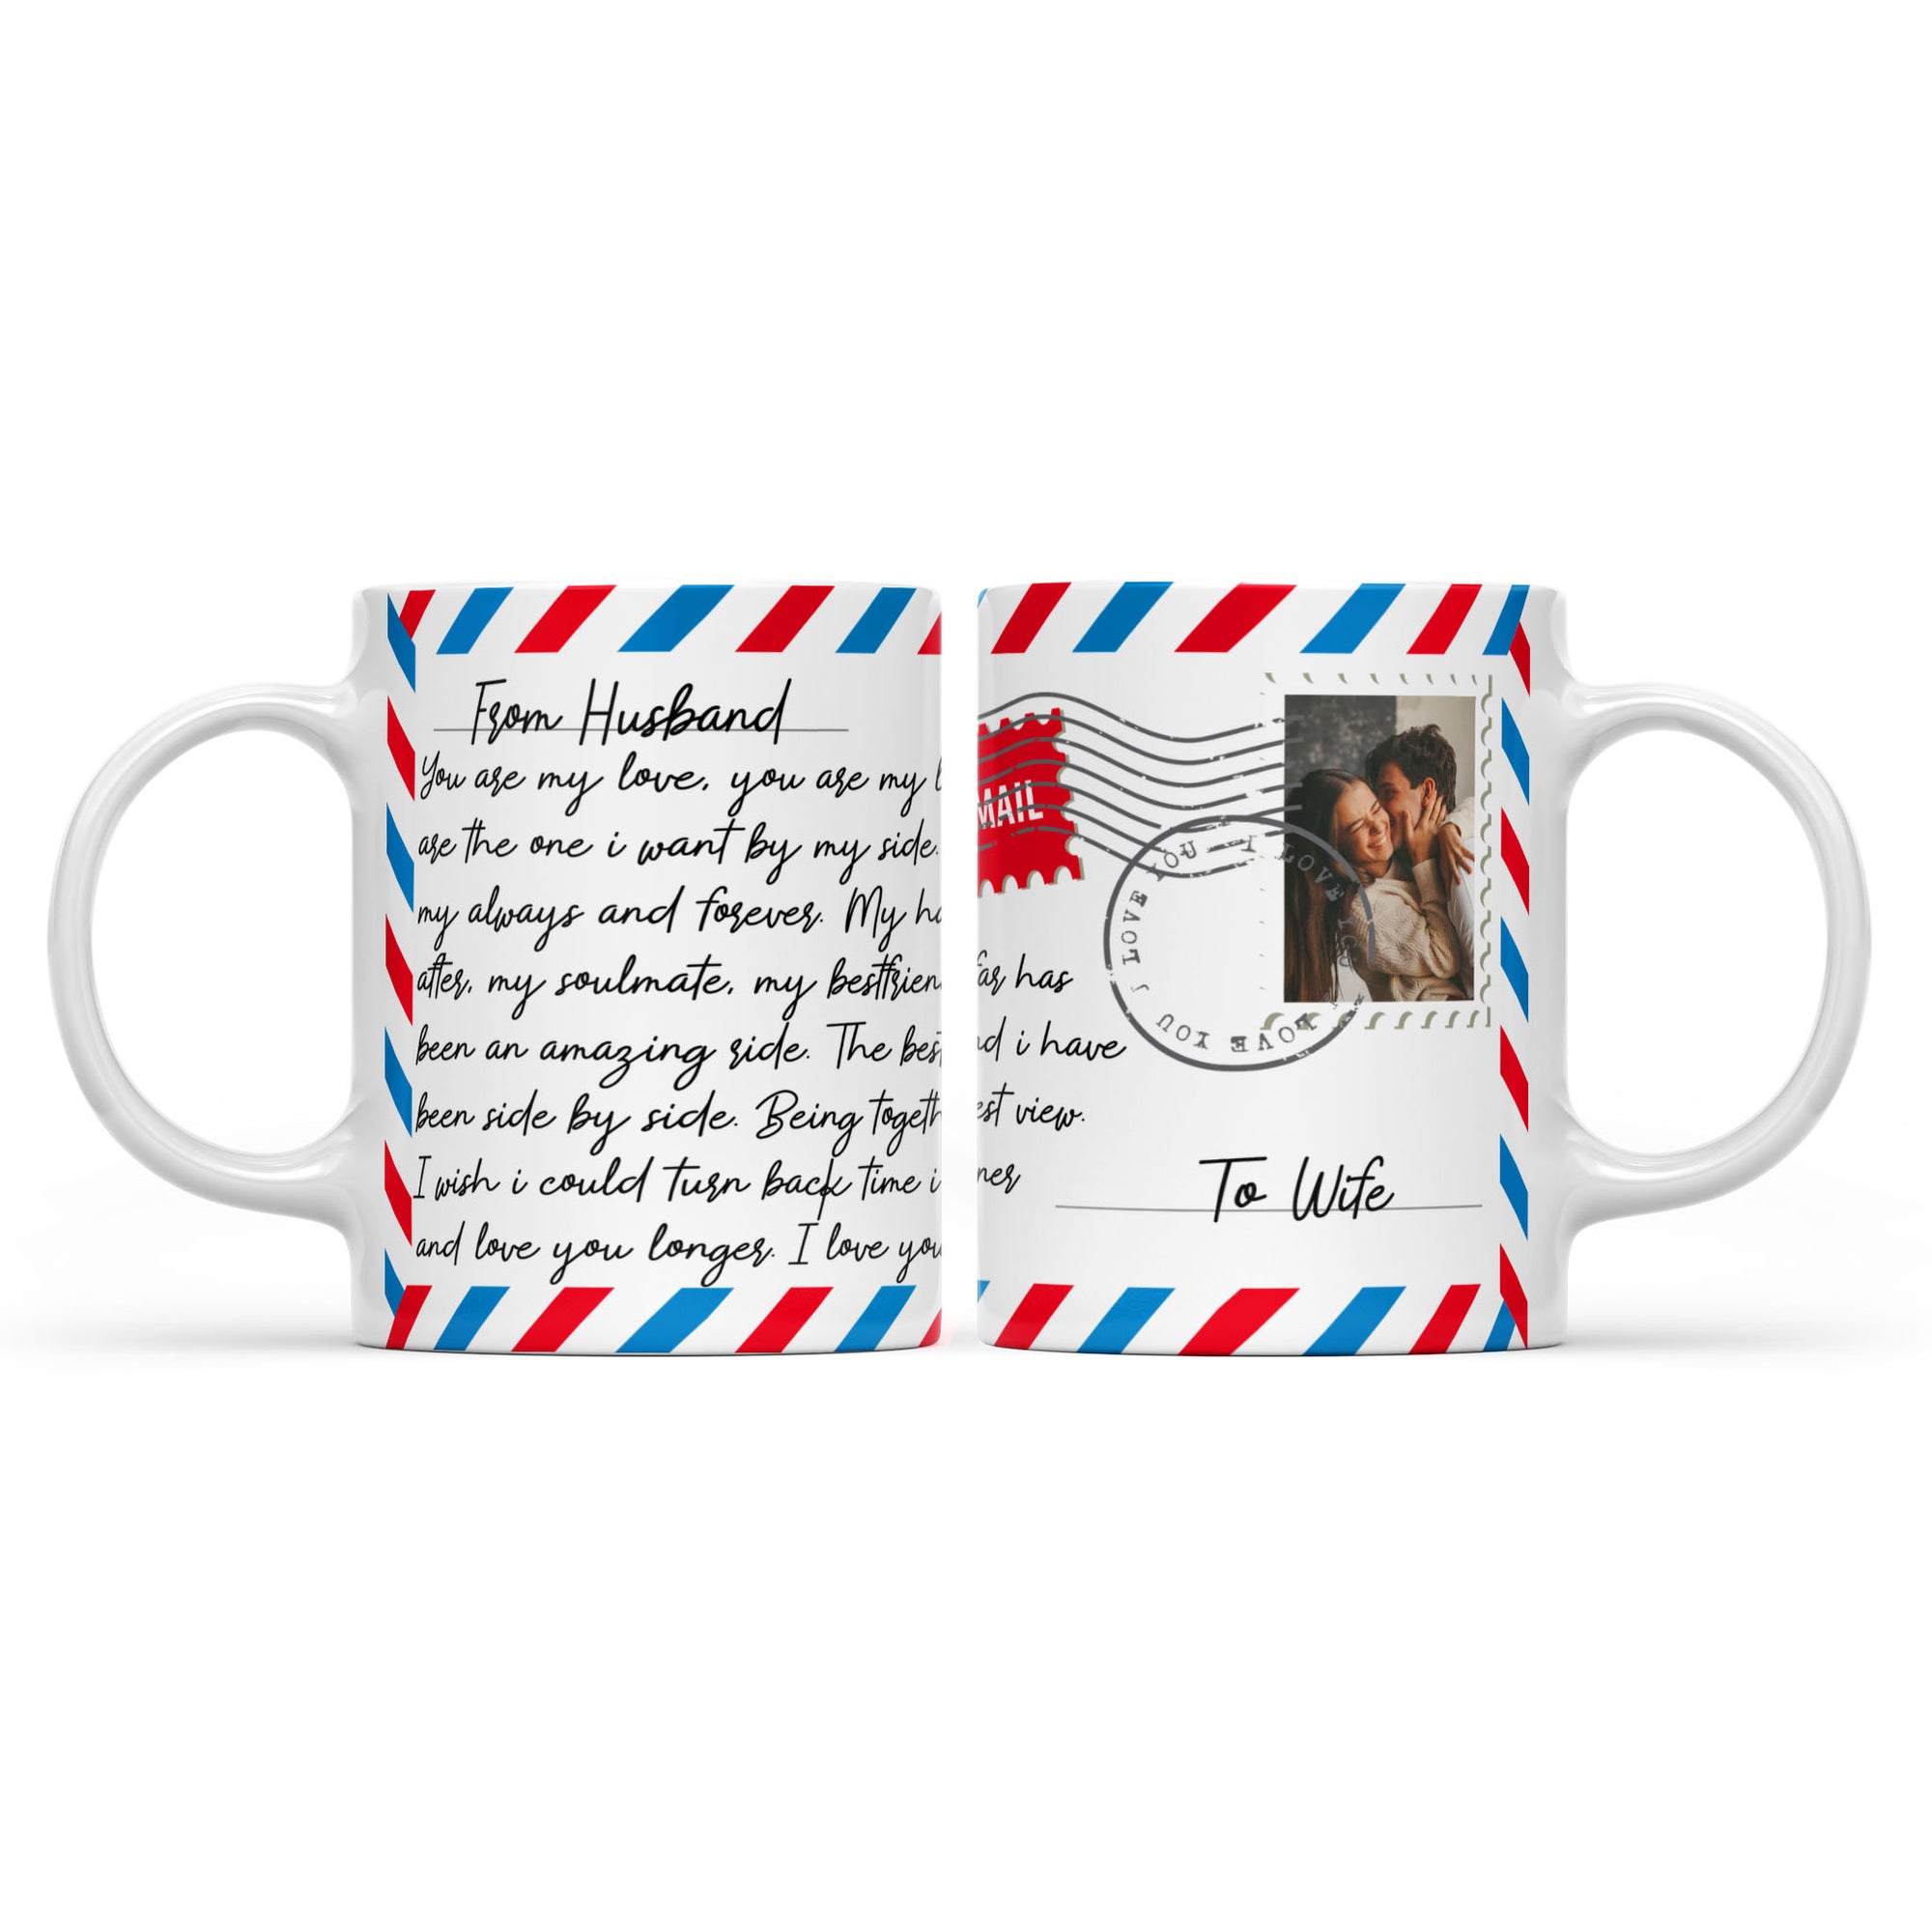 Mug Love Letter Gift Ideas for Wife, Custom Message From Husband to Wife Mug